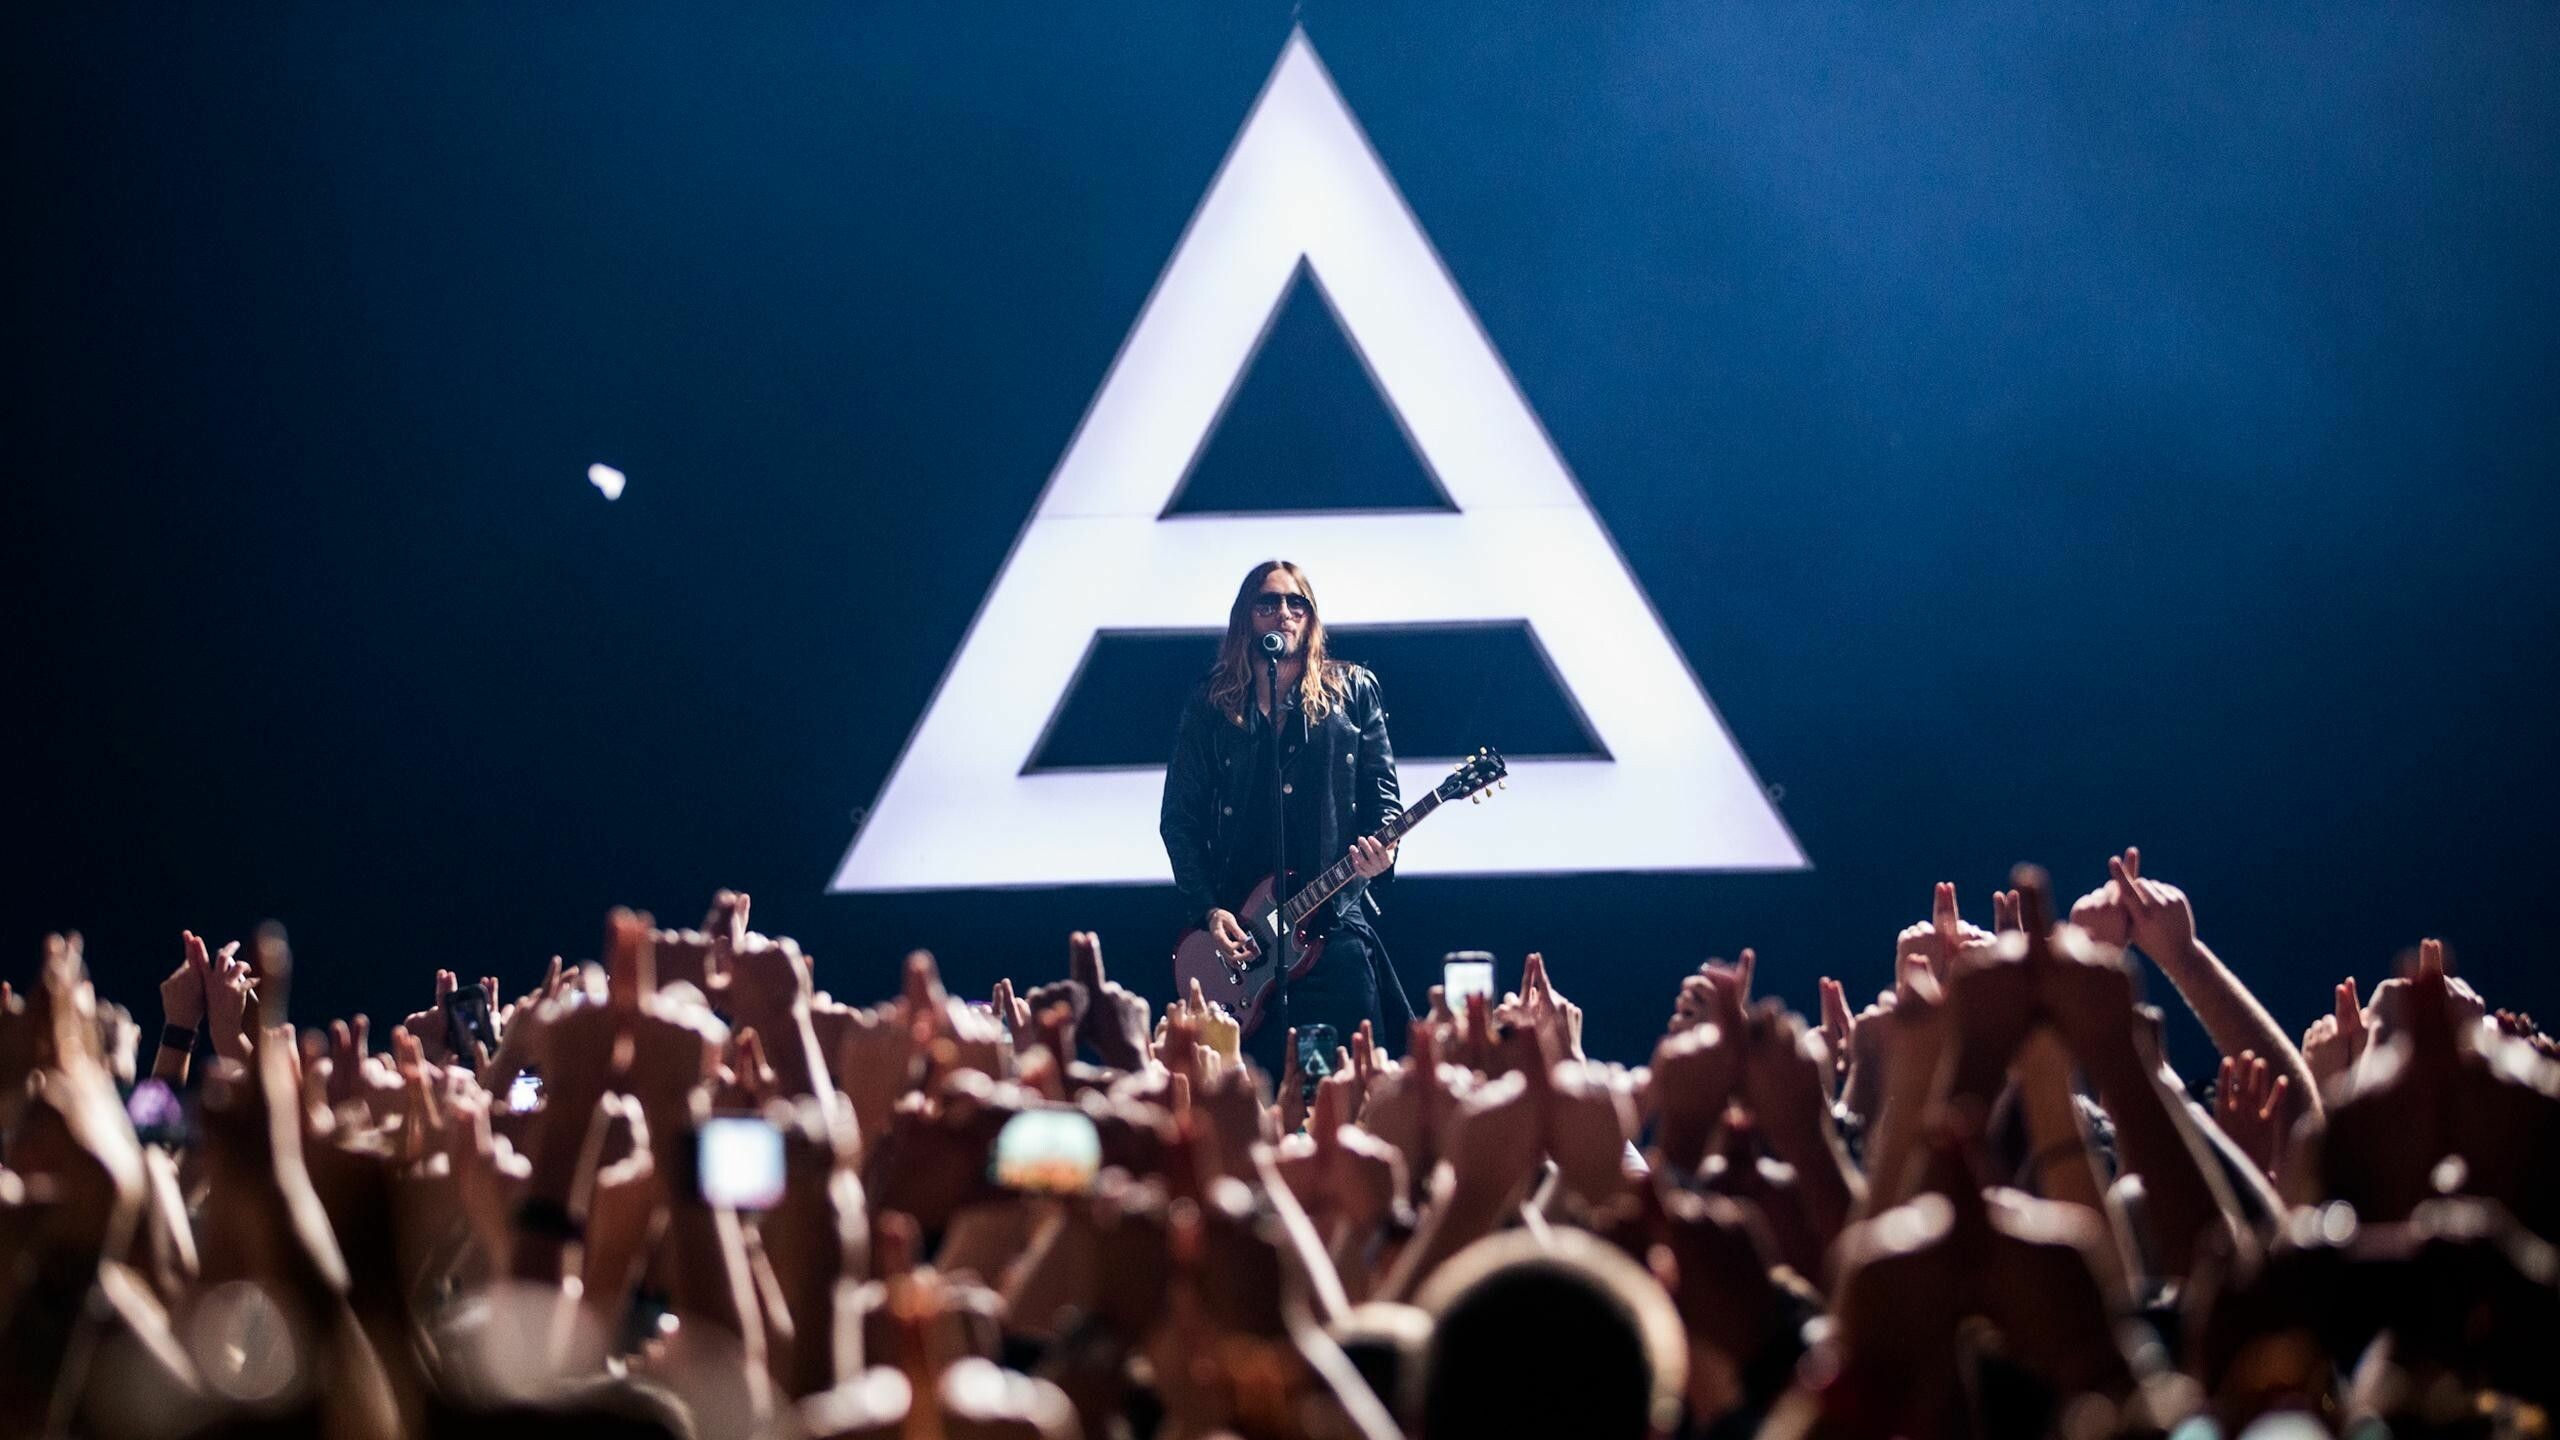 Thirty Seconds to Mars: A Beautiful Lie was named Best Album by Rock on Request in 2007. 2560x1440 HD Wallpaper.